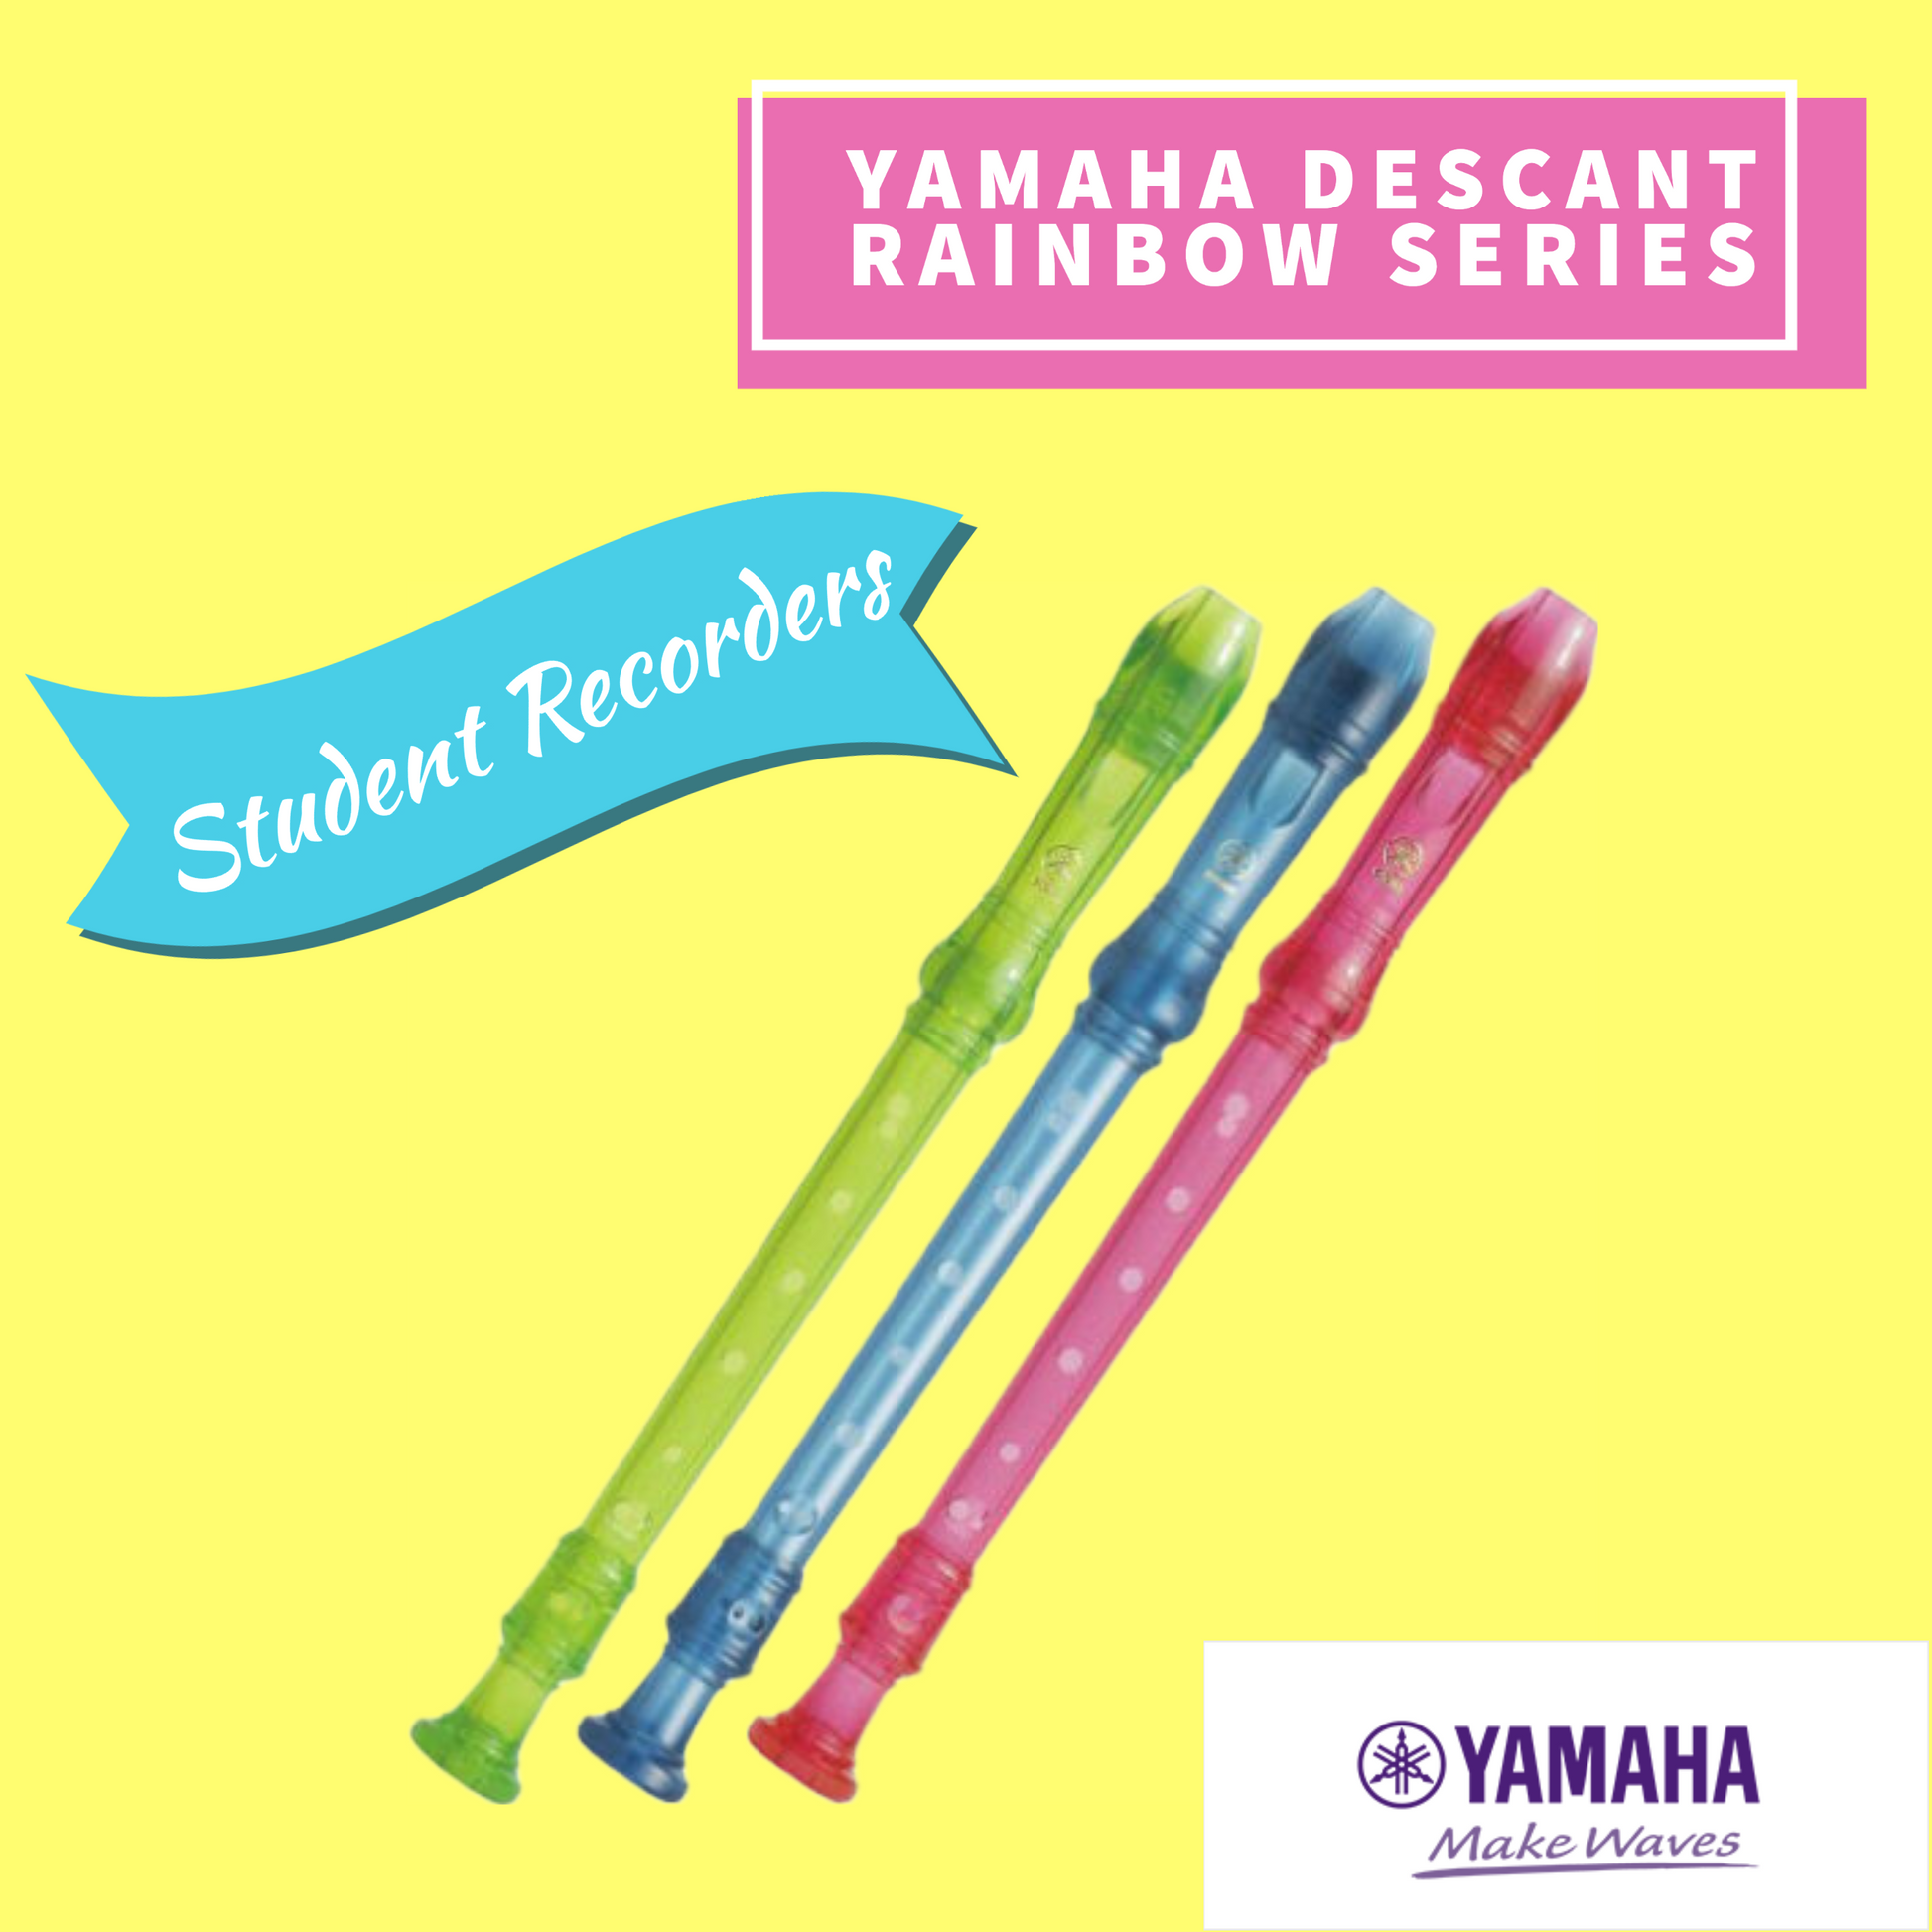 Yamaha Yrs-24Bb Descant C 3 Piece Student Recorder (Candy Blue) Musical Instruments & Accessories